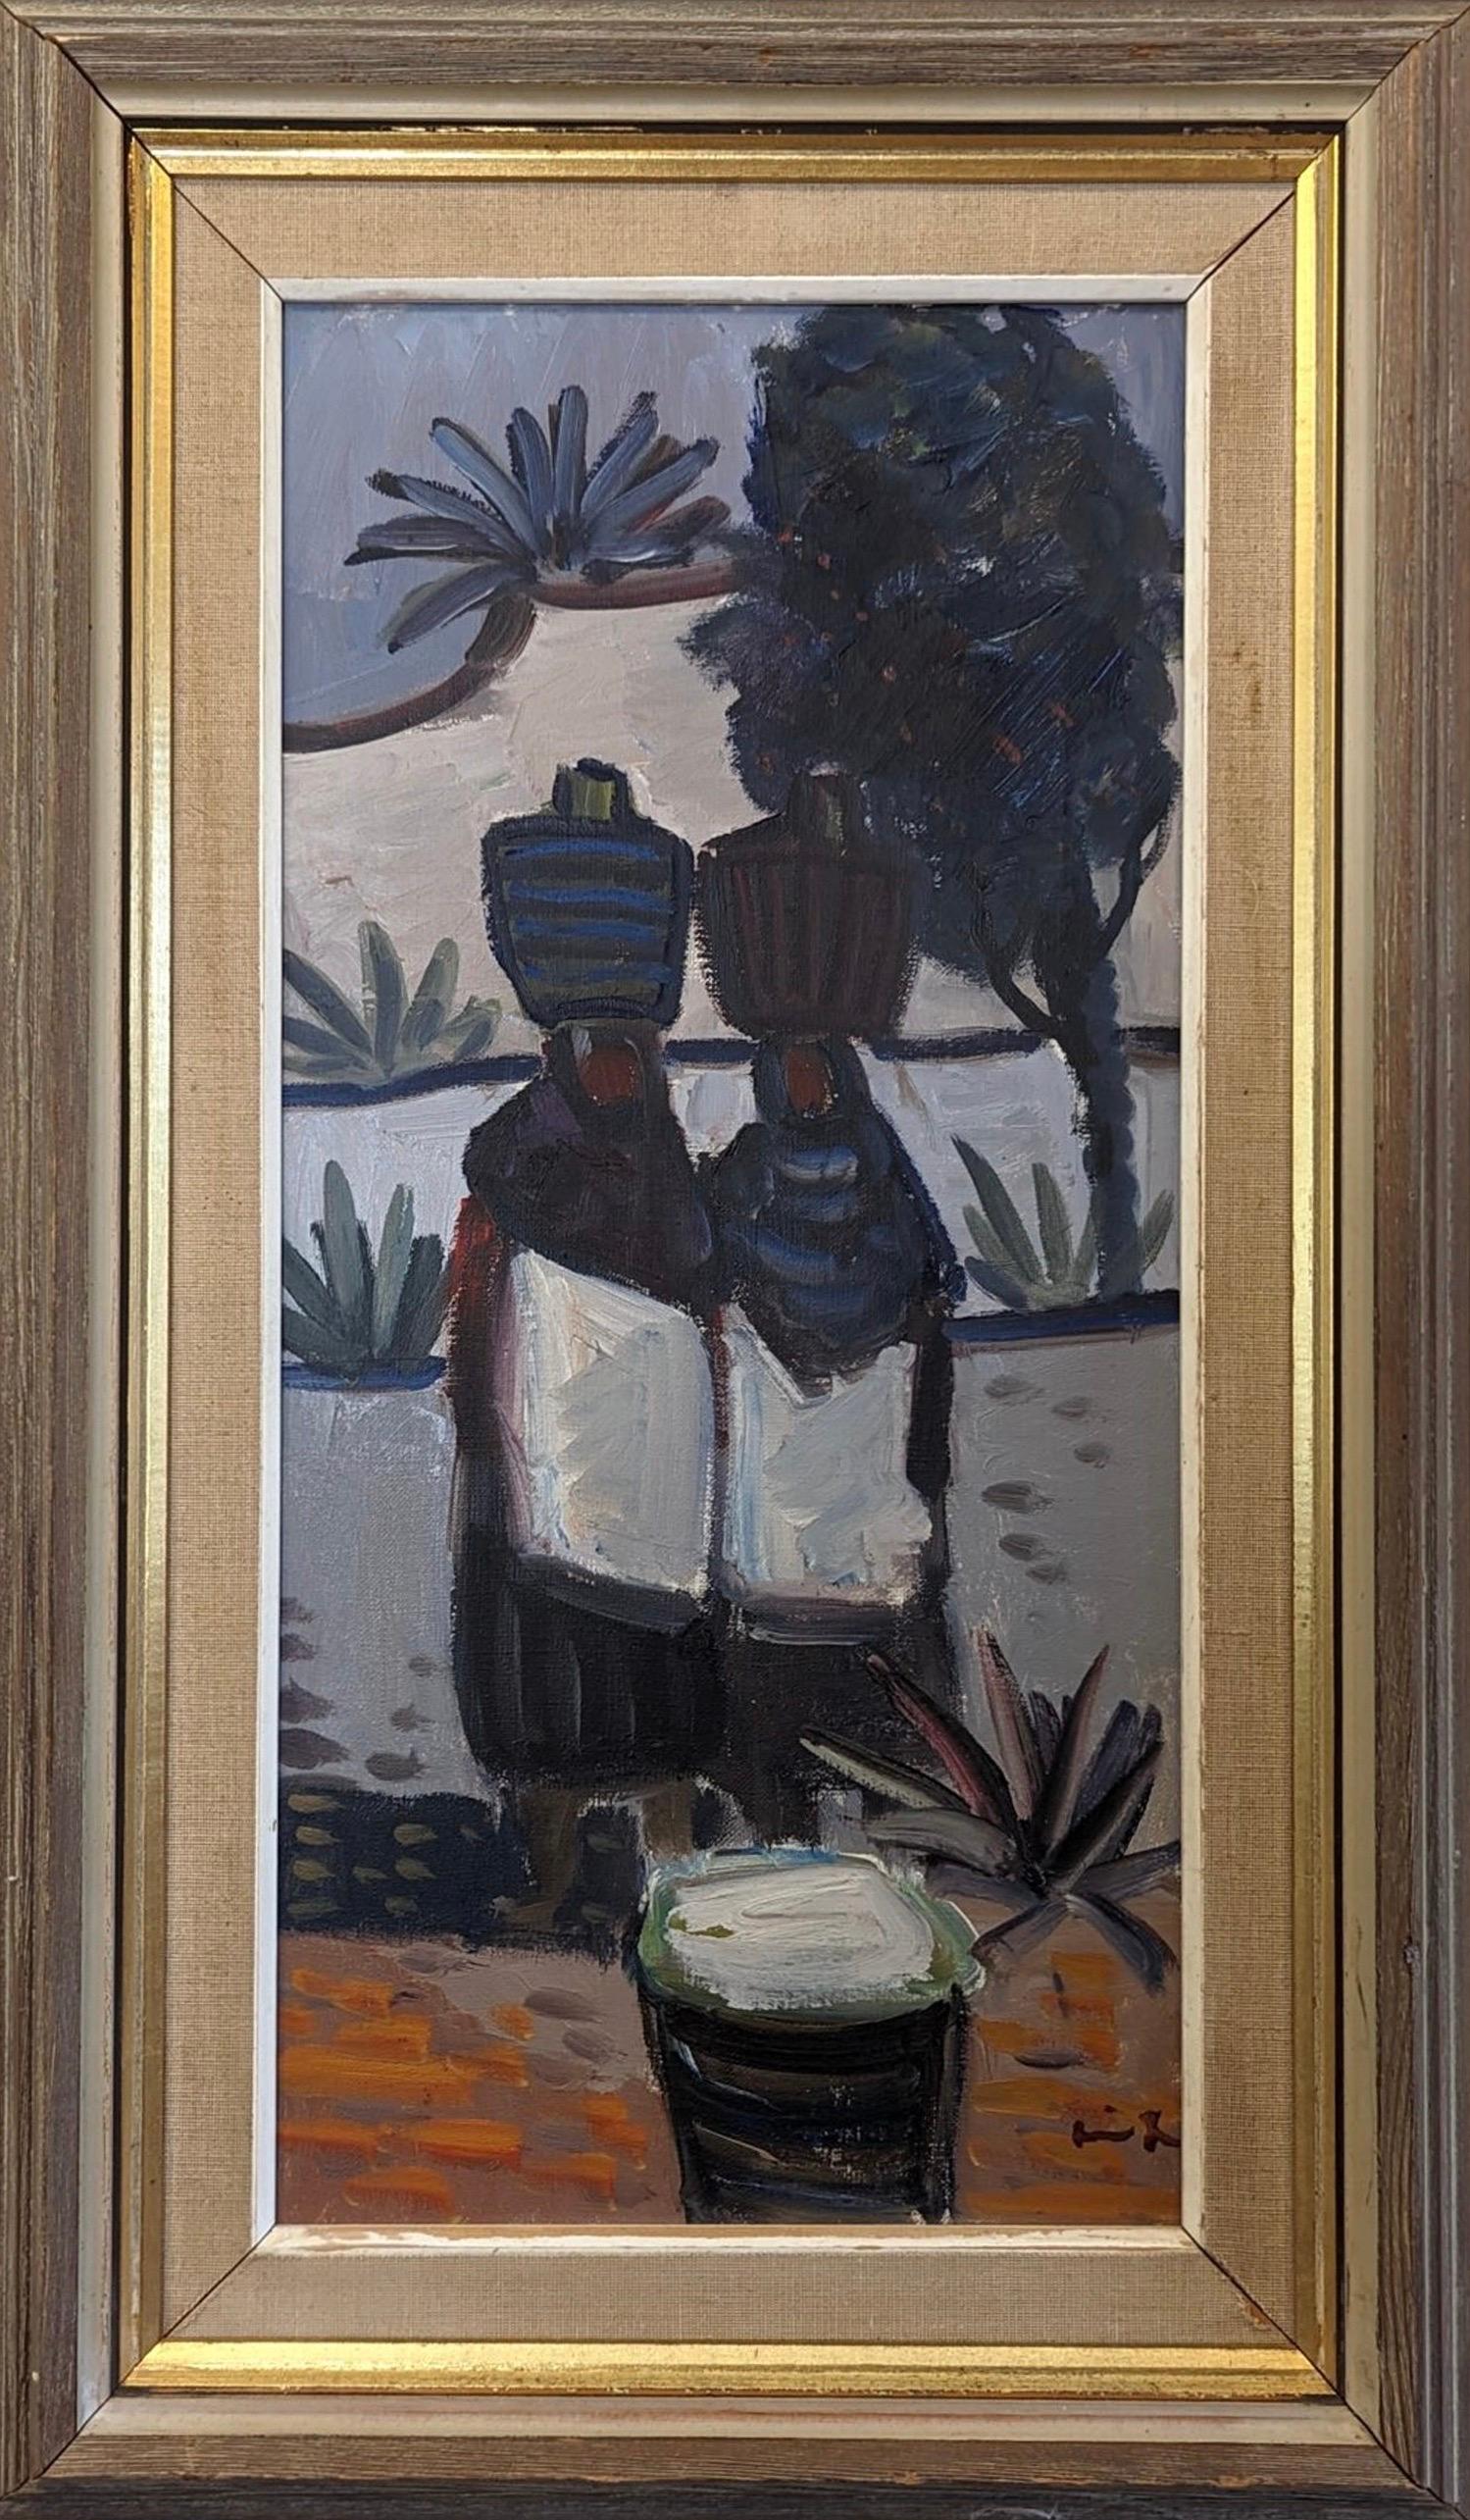 Unknown Figurative Painting - Mid-Century Modern Expressive Figurative Framed Oil Painting - Basket Carriers